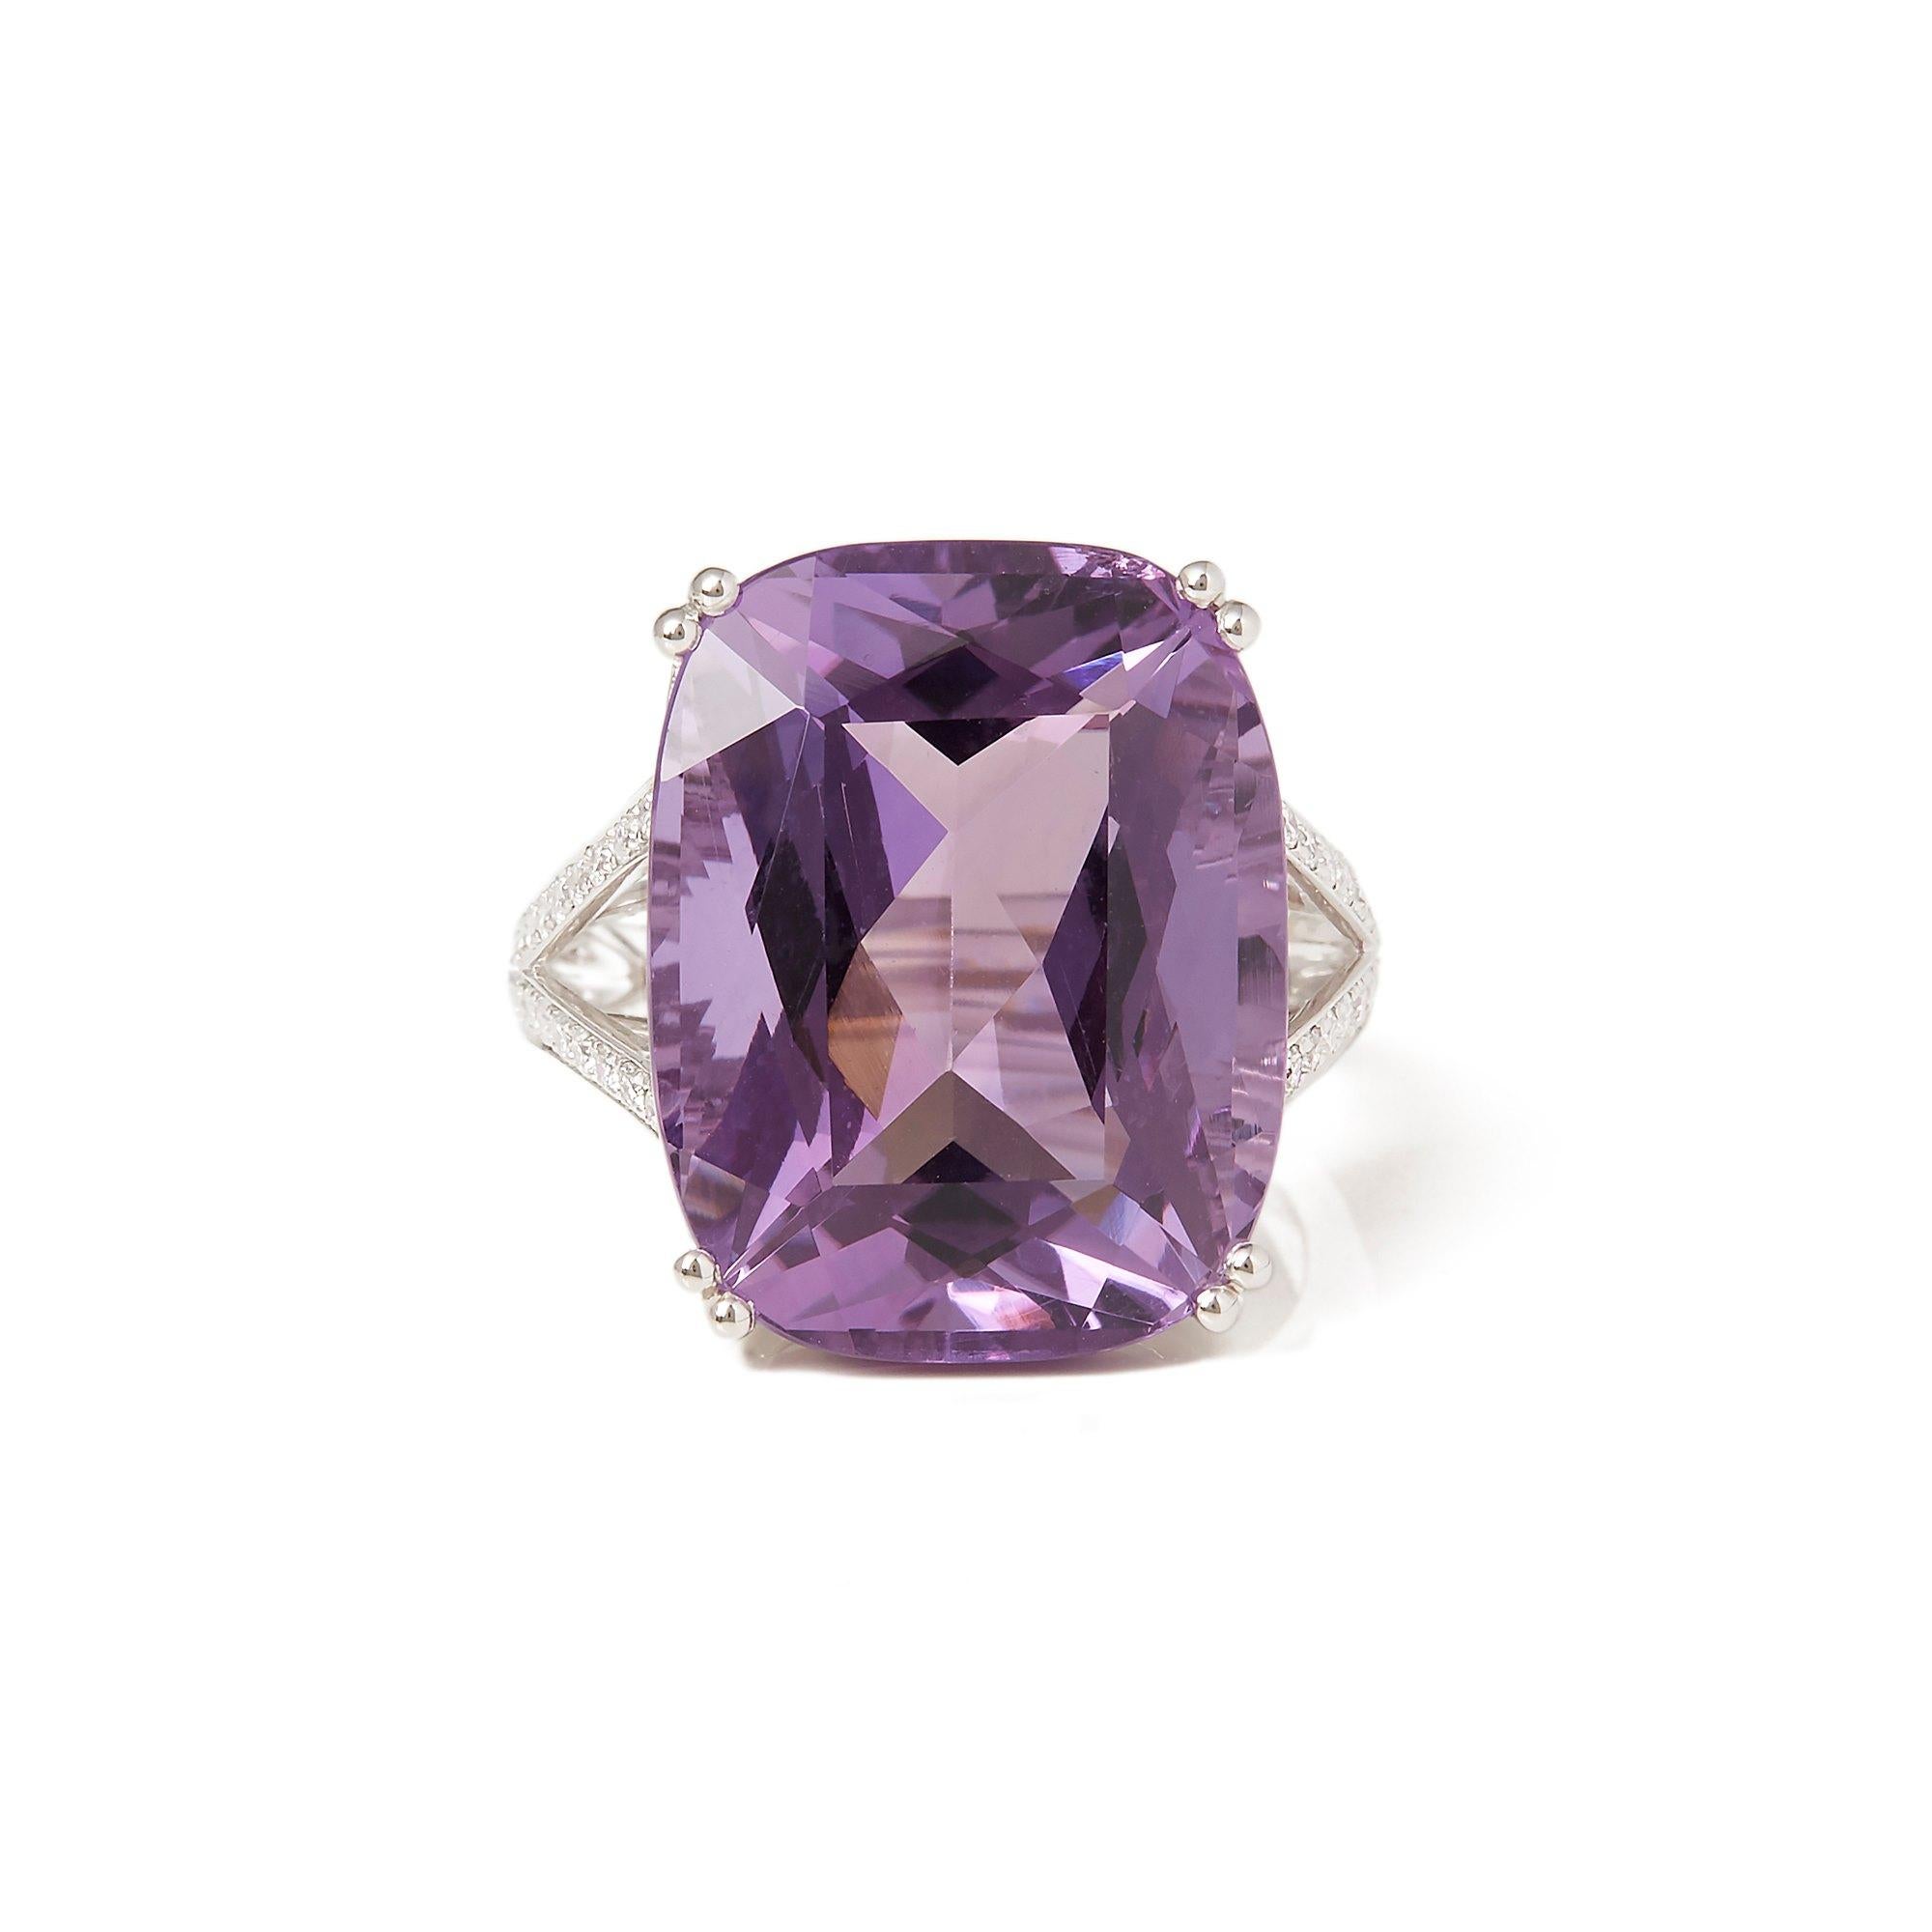 This ring designed by David Jerome is from his private collection and features one cushion cut Amethyst totalling 17.23cts sourced in Russia. Set with round brilliant cut Diamonds totalling 0.40cts mounted in an 18k white gold setting. UK finger